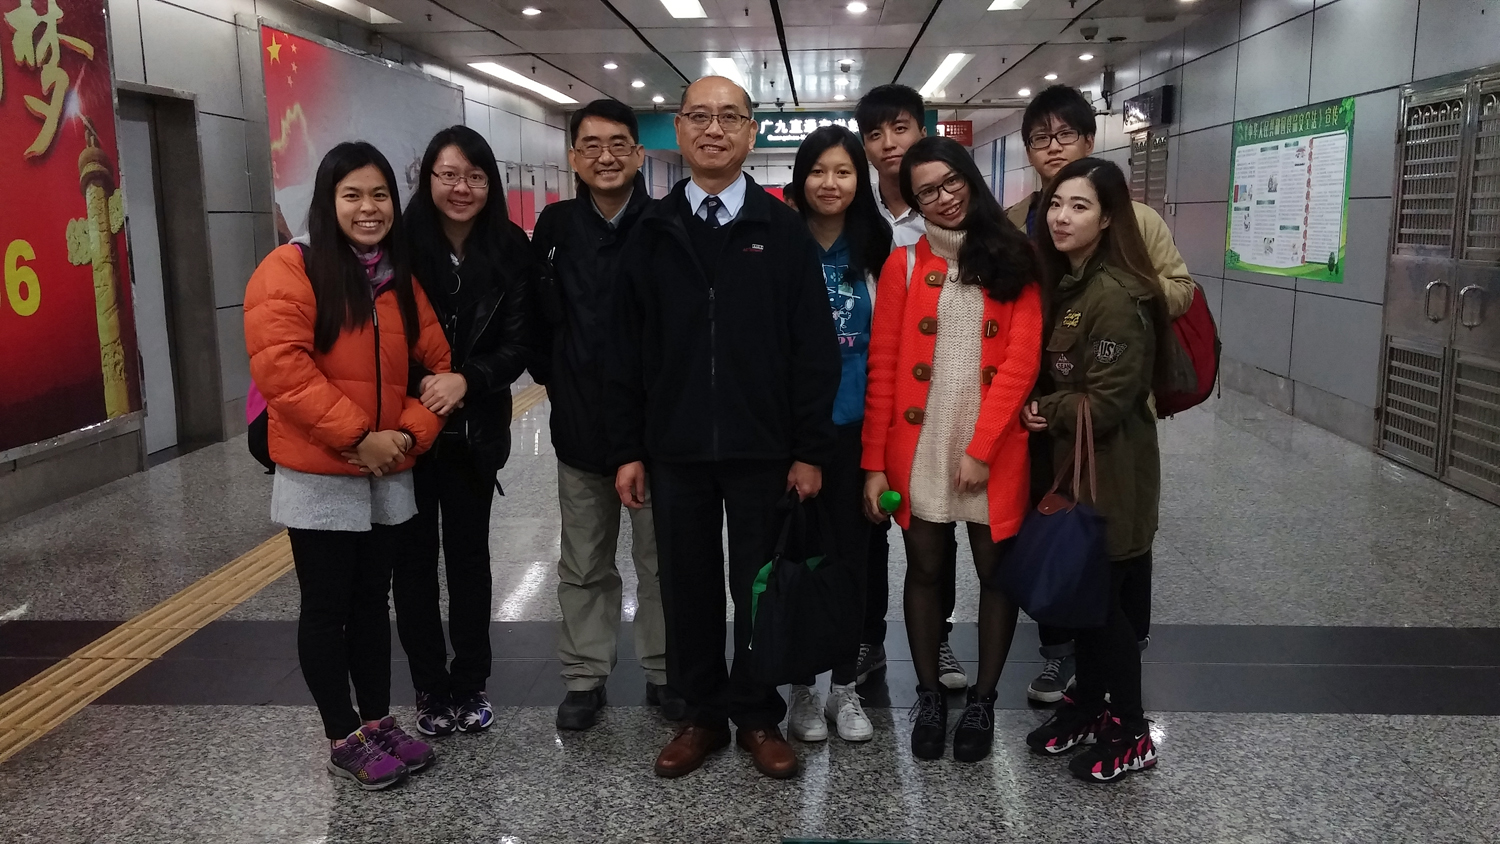 Prof. Siu Wai Sum, Programme Director of Bachelor of Commerce (Hons) in Marketing, HKBU (4th from the left), Dr. Martin Tsui, Advisor of CIE Lunar New Year Fair Team (3rd from the left) and the students met each other in Guangzhou railway station. 